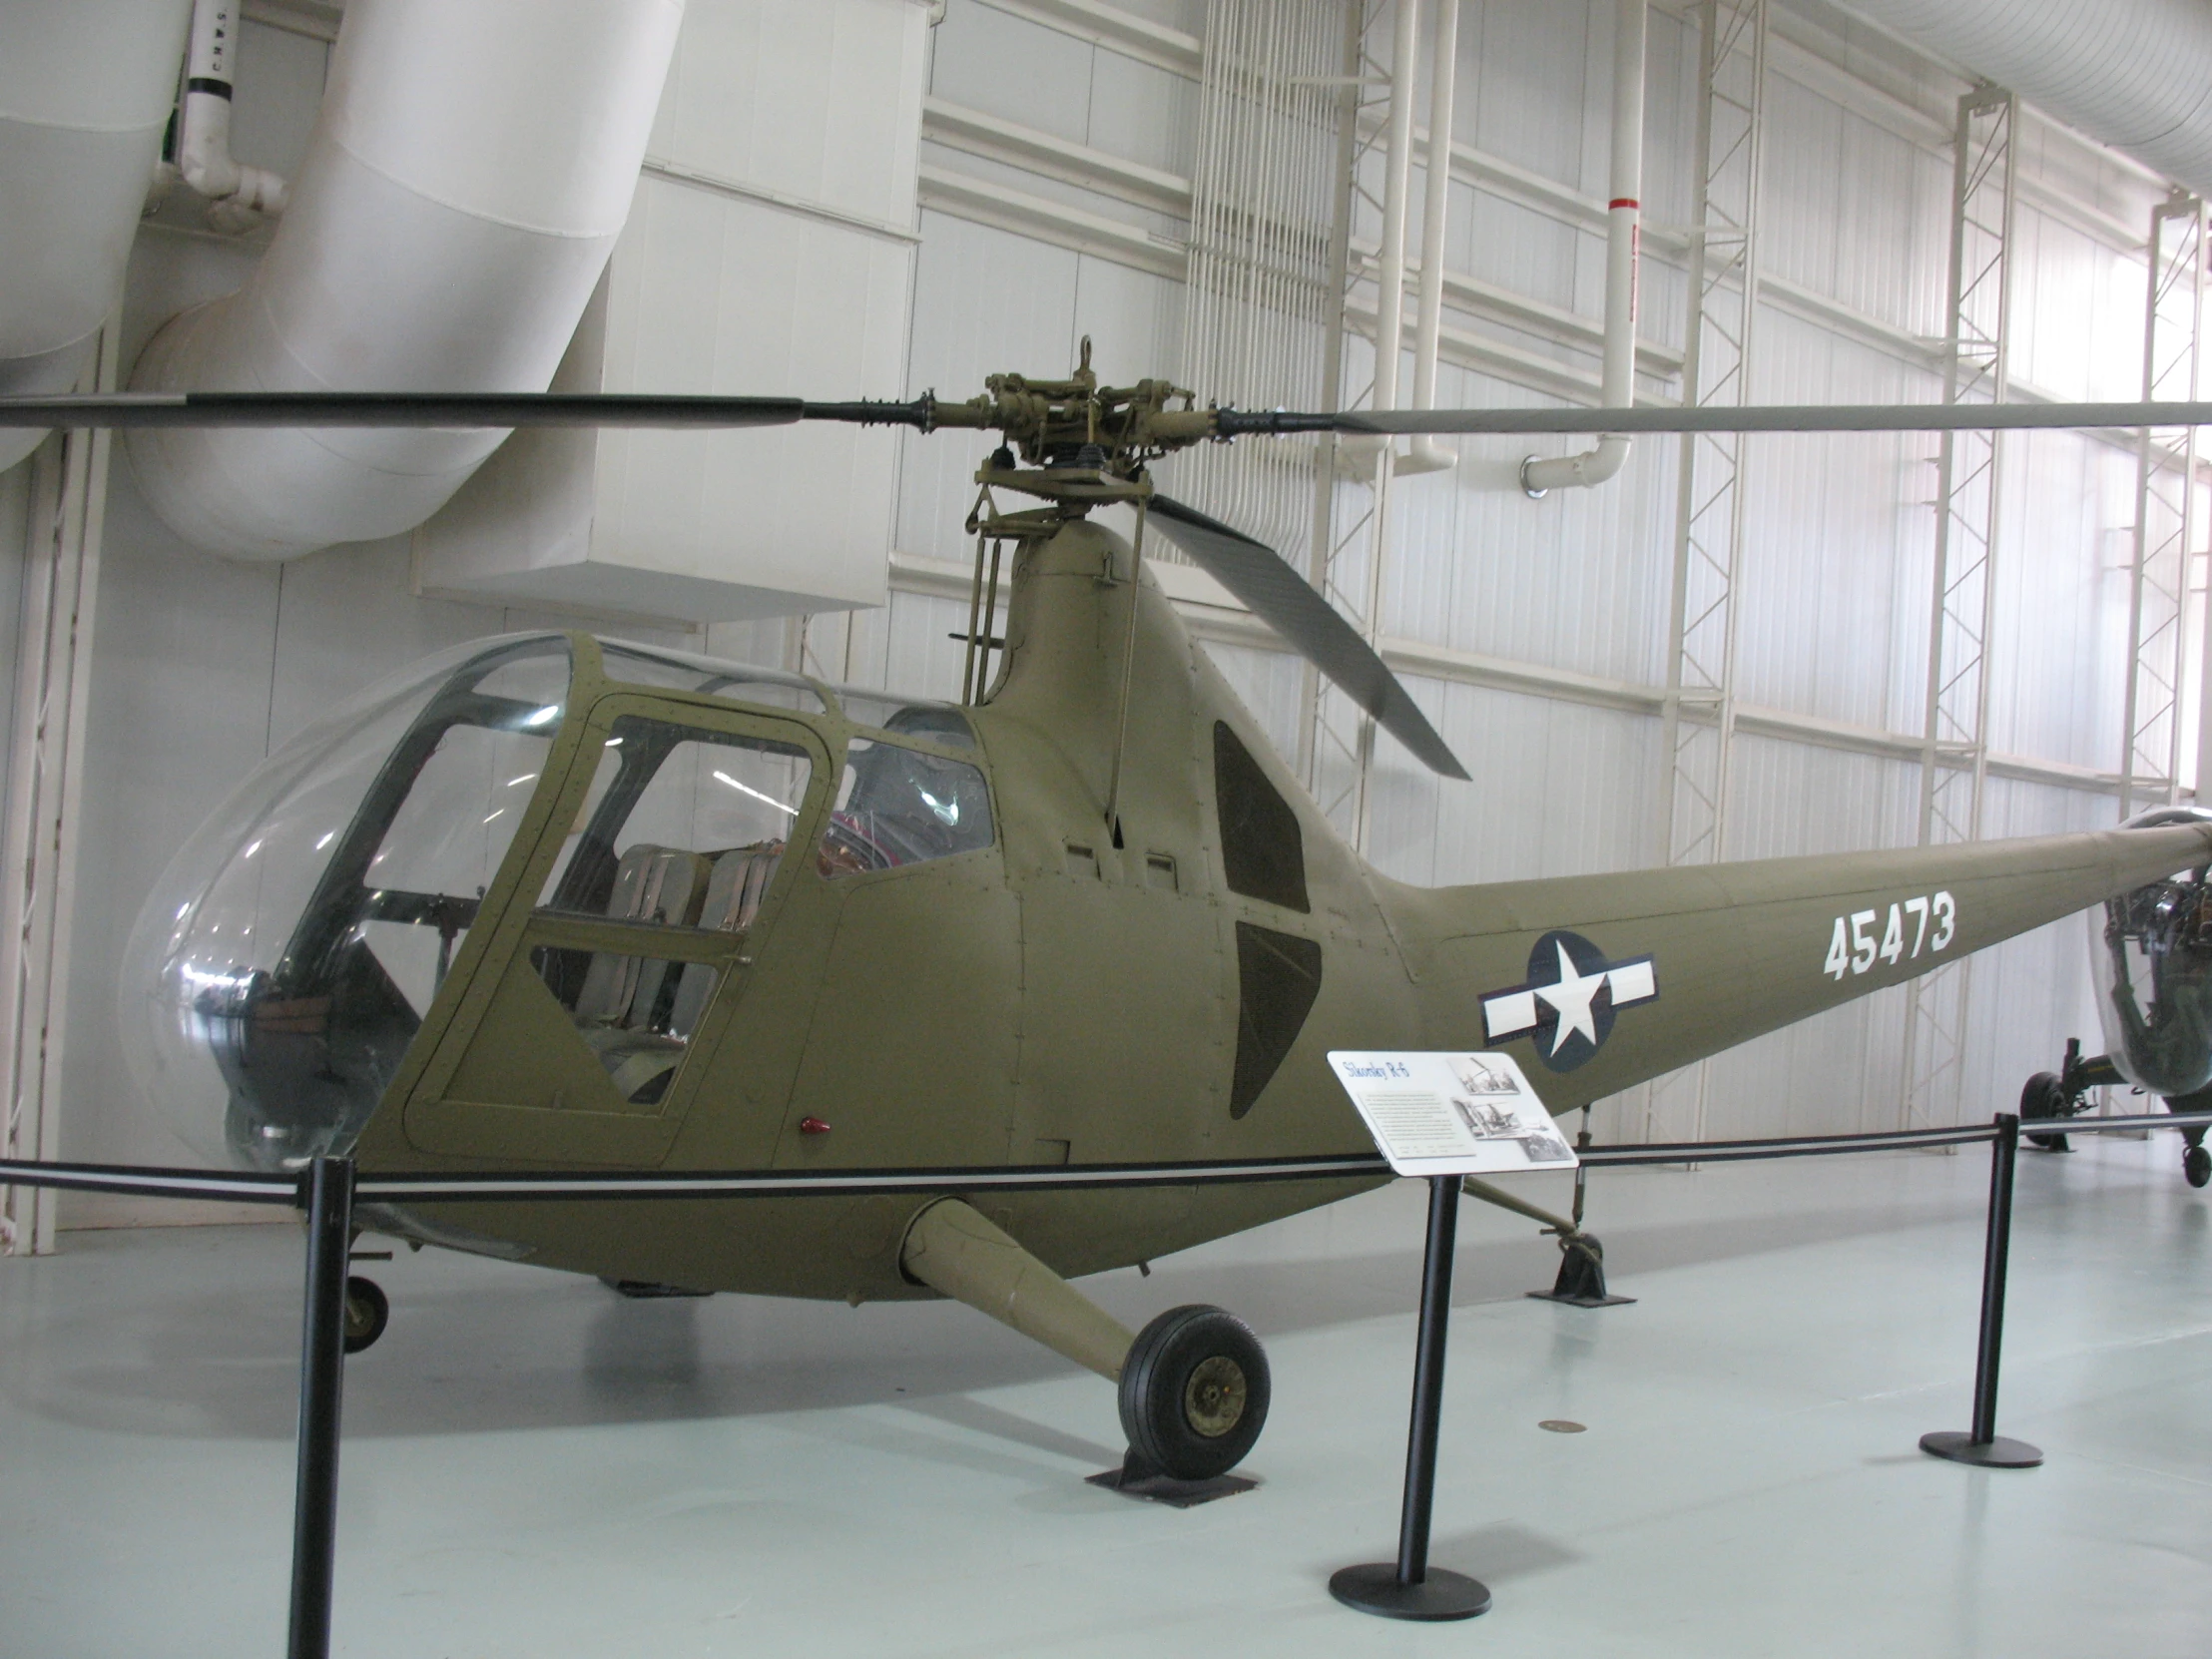 military helicopter on display at indoor museum exhibit